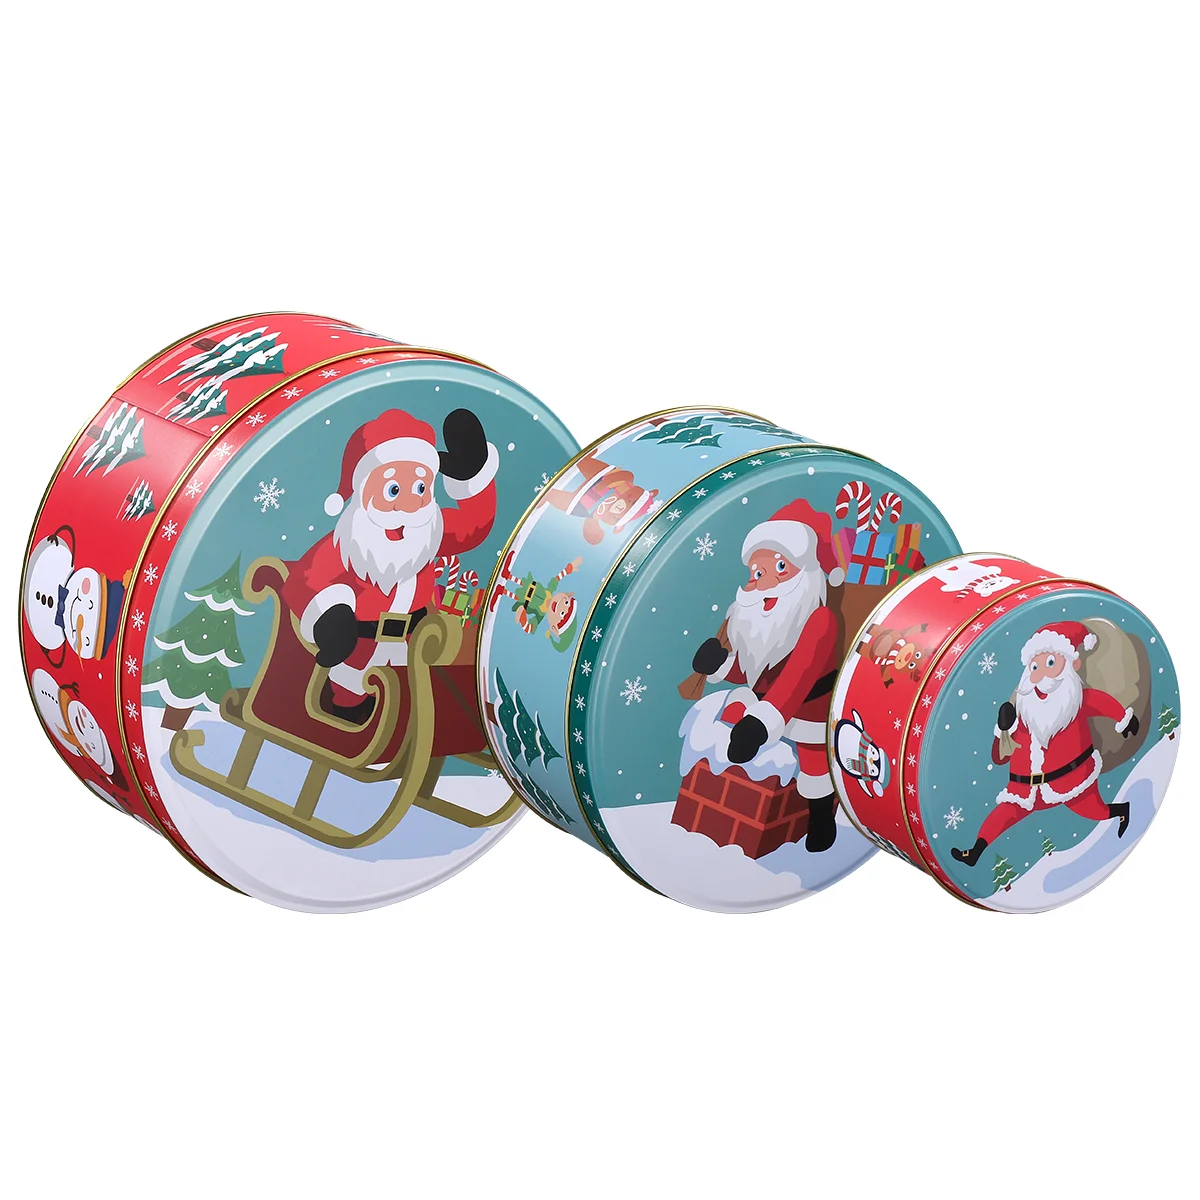 

Christmas Tinplate Cookie Tins Candies Biscuits Treat Boxes Small Gift Case Christmas Tinplate Candy Boxes